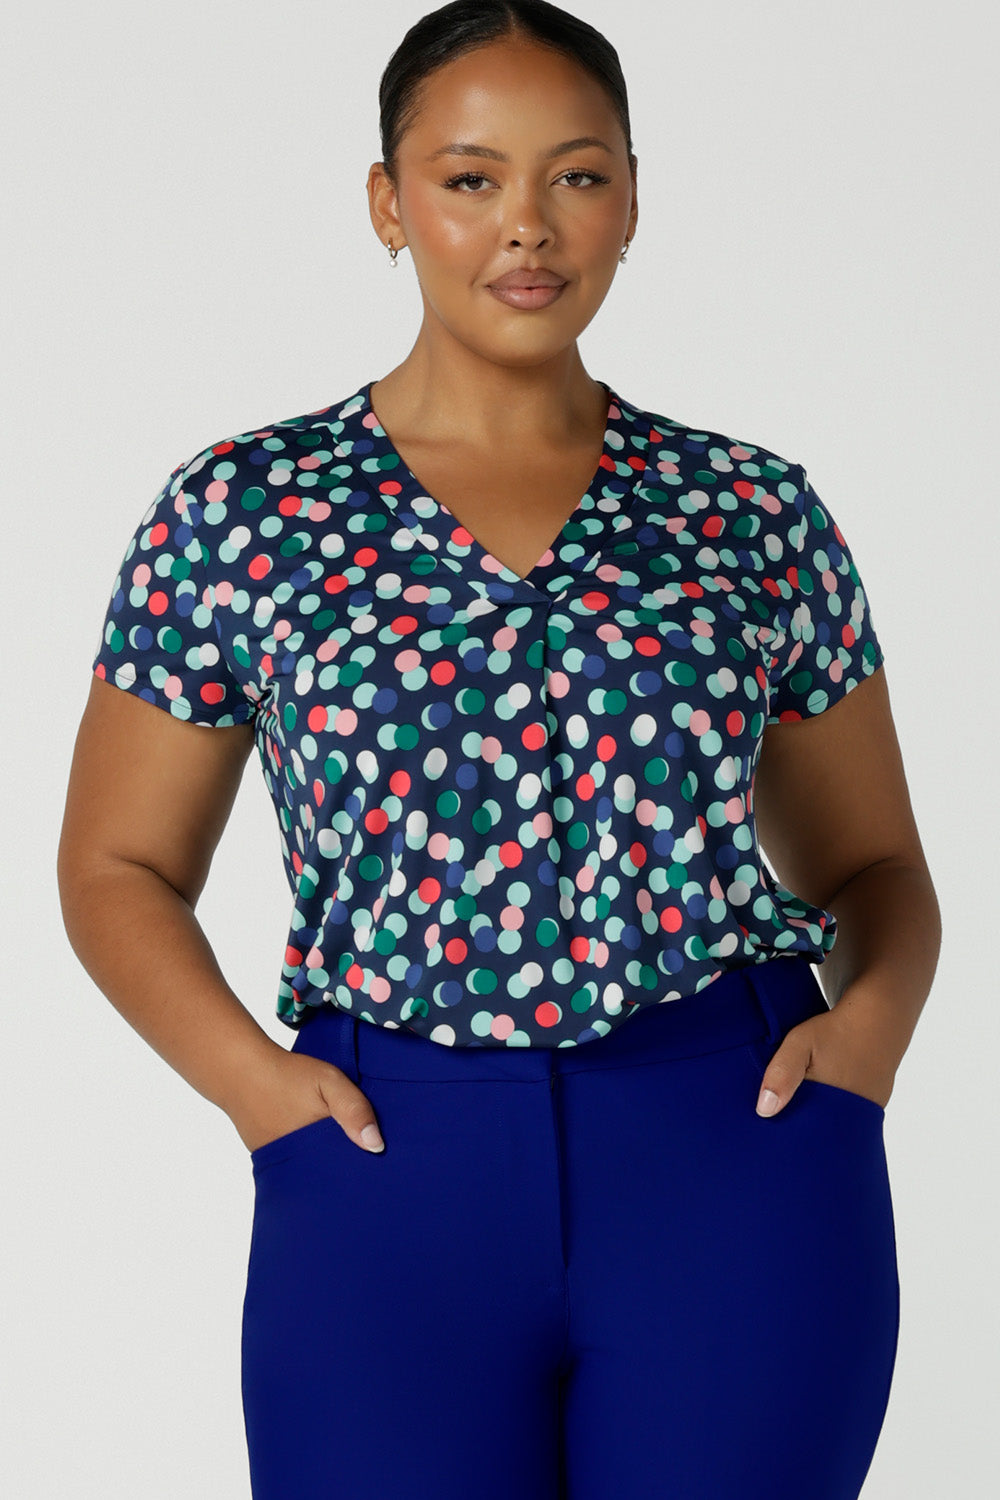 A size 18 woman wears a great top for plus size women's workwear. This V-neck, short sleeve jersey top features a bubble spot print and has a navy base. Made in Australia by Australian and New Zealand women's clothing brand, this workwear top is available to shop online in sizes 8 to 24.